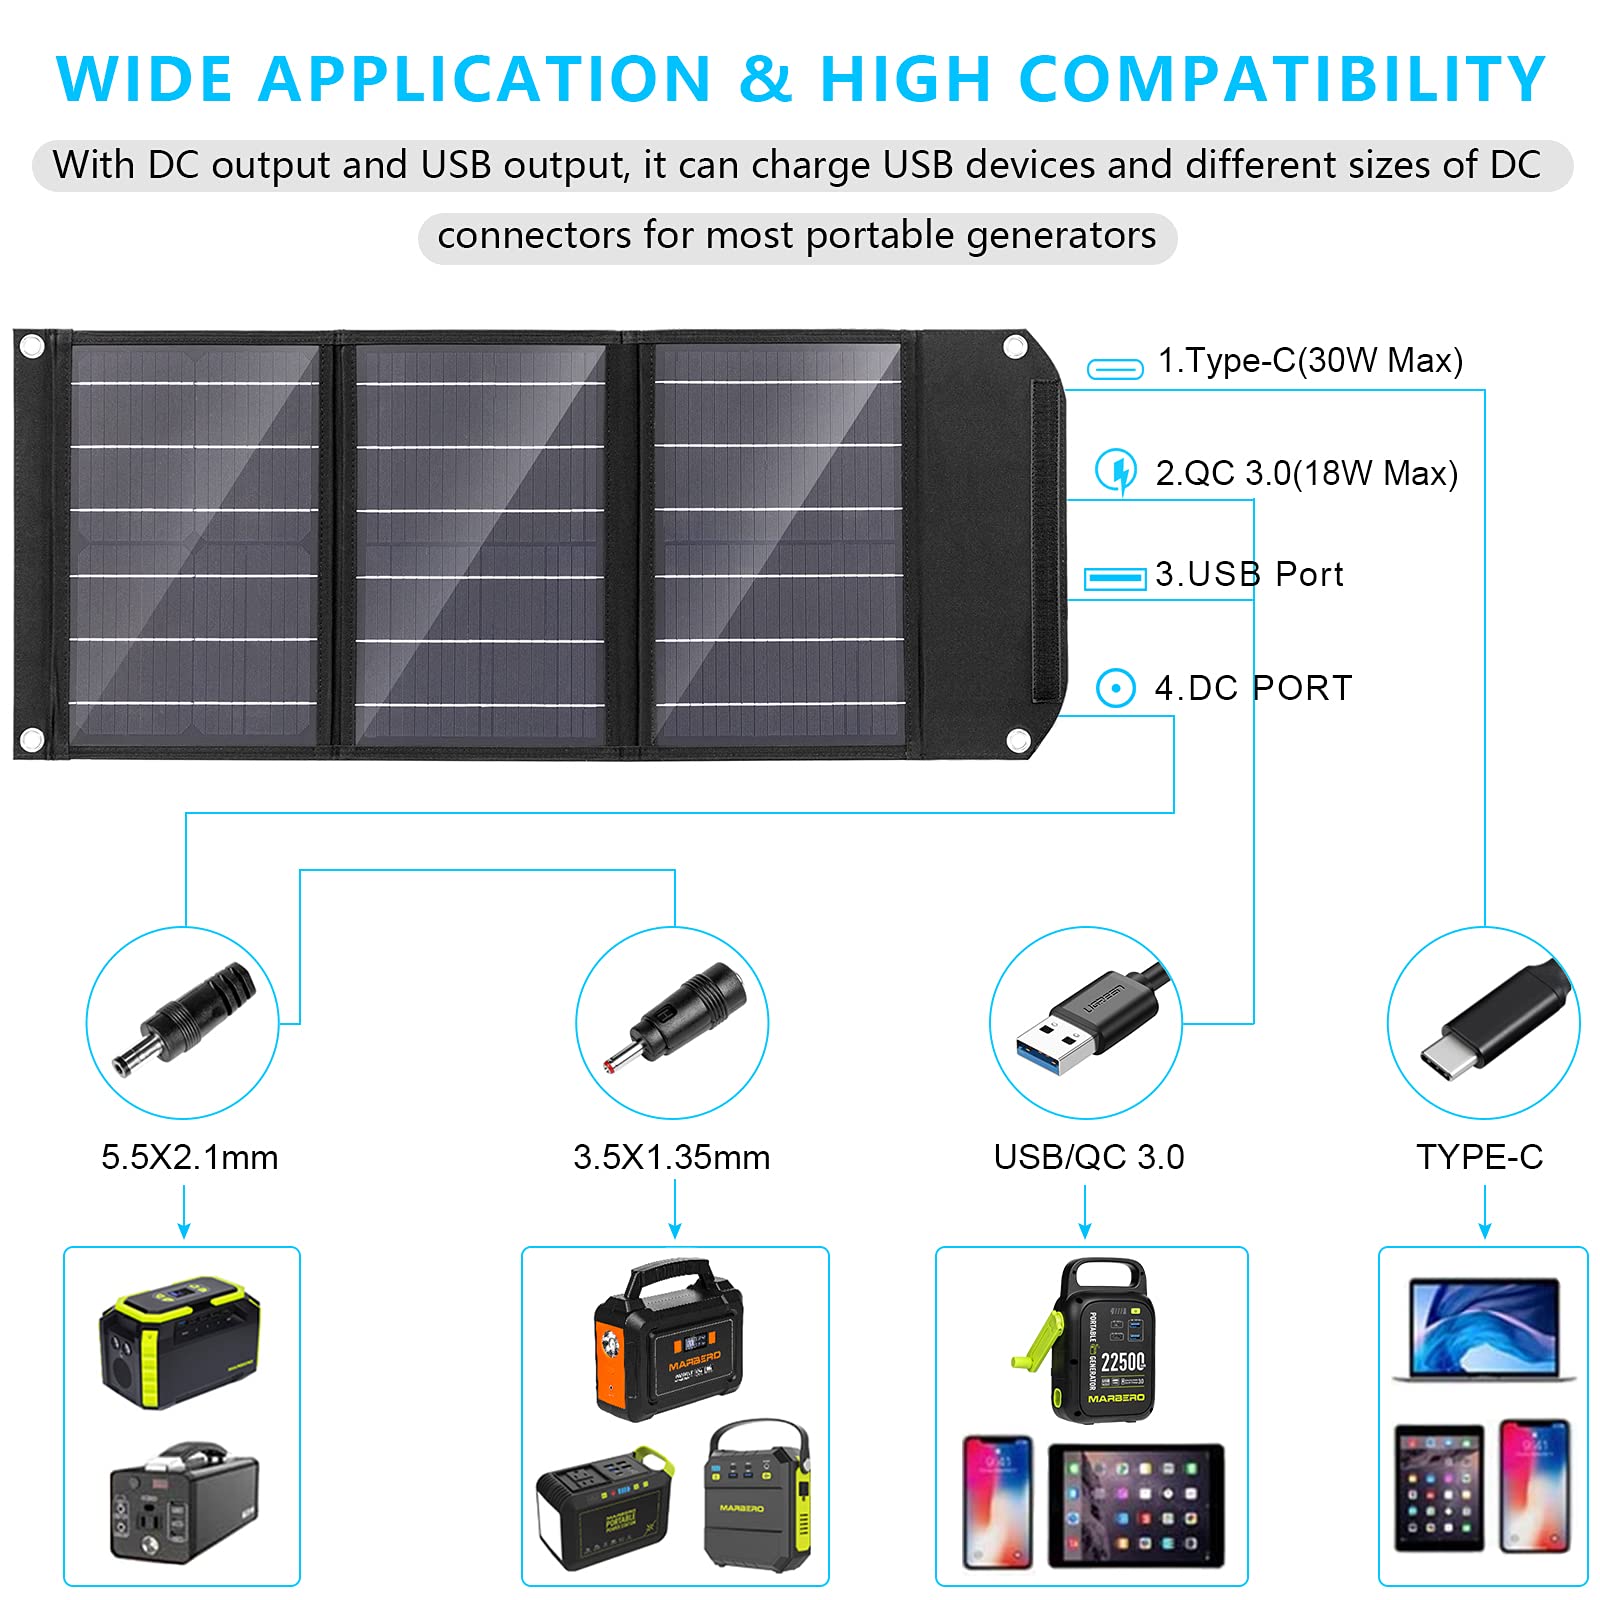 wide application & high compatibility